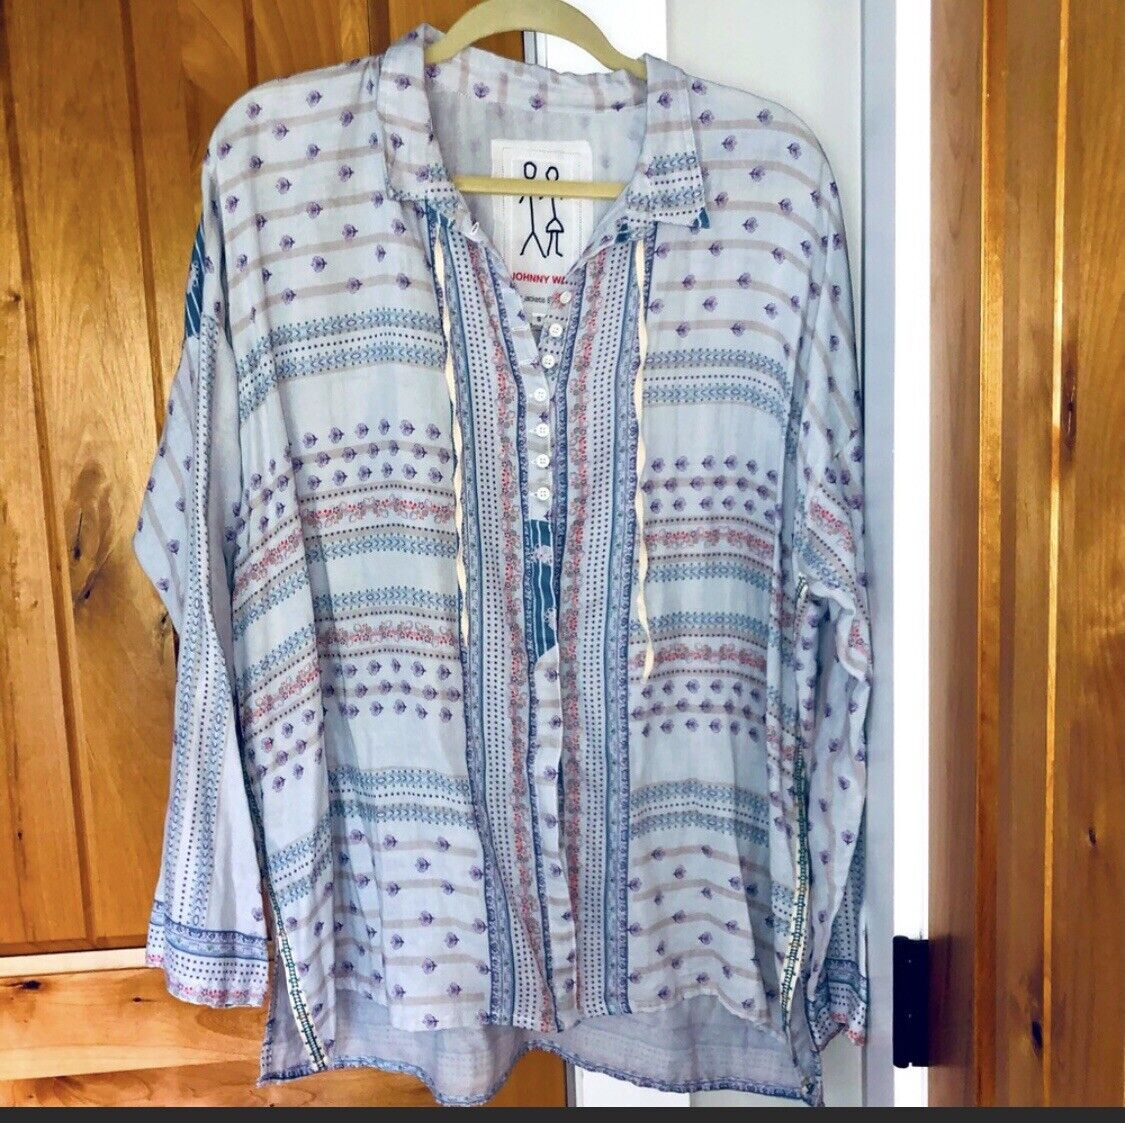 Johnny Was button down tunic top - Gem